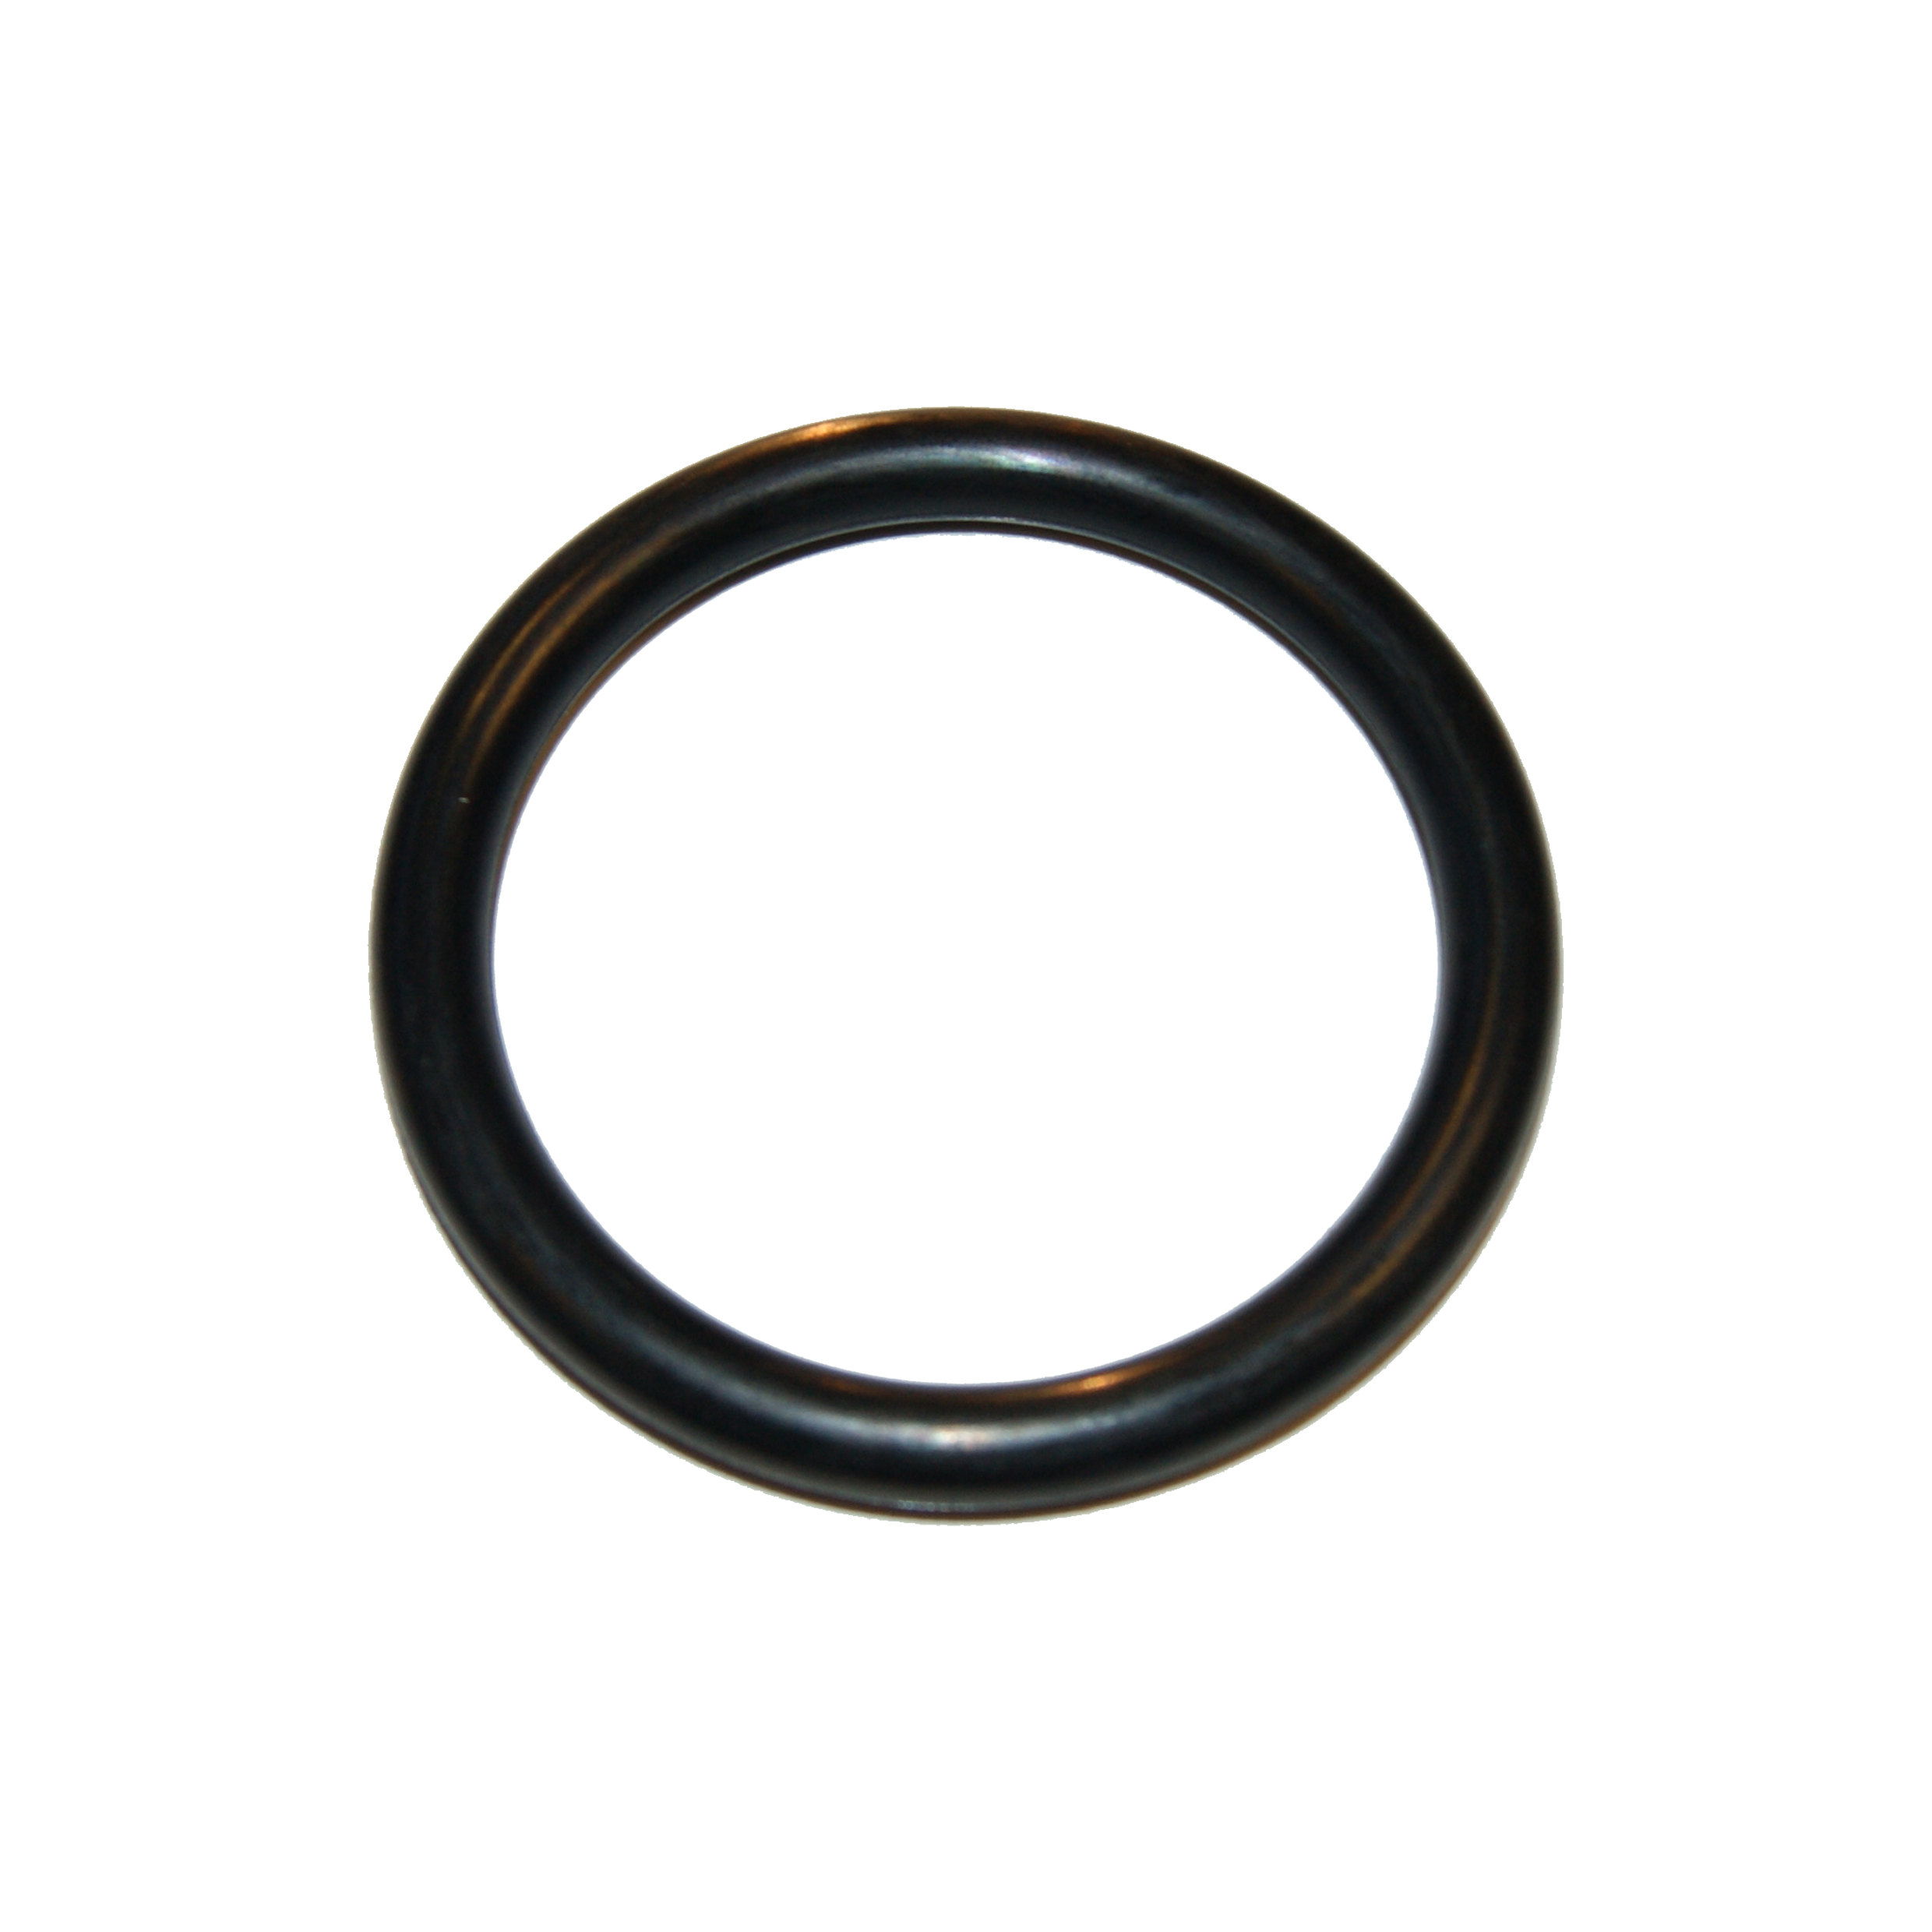 Atlantic Rubber Company | Find Rubber Sealing Products